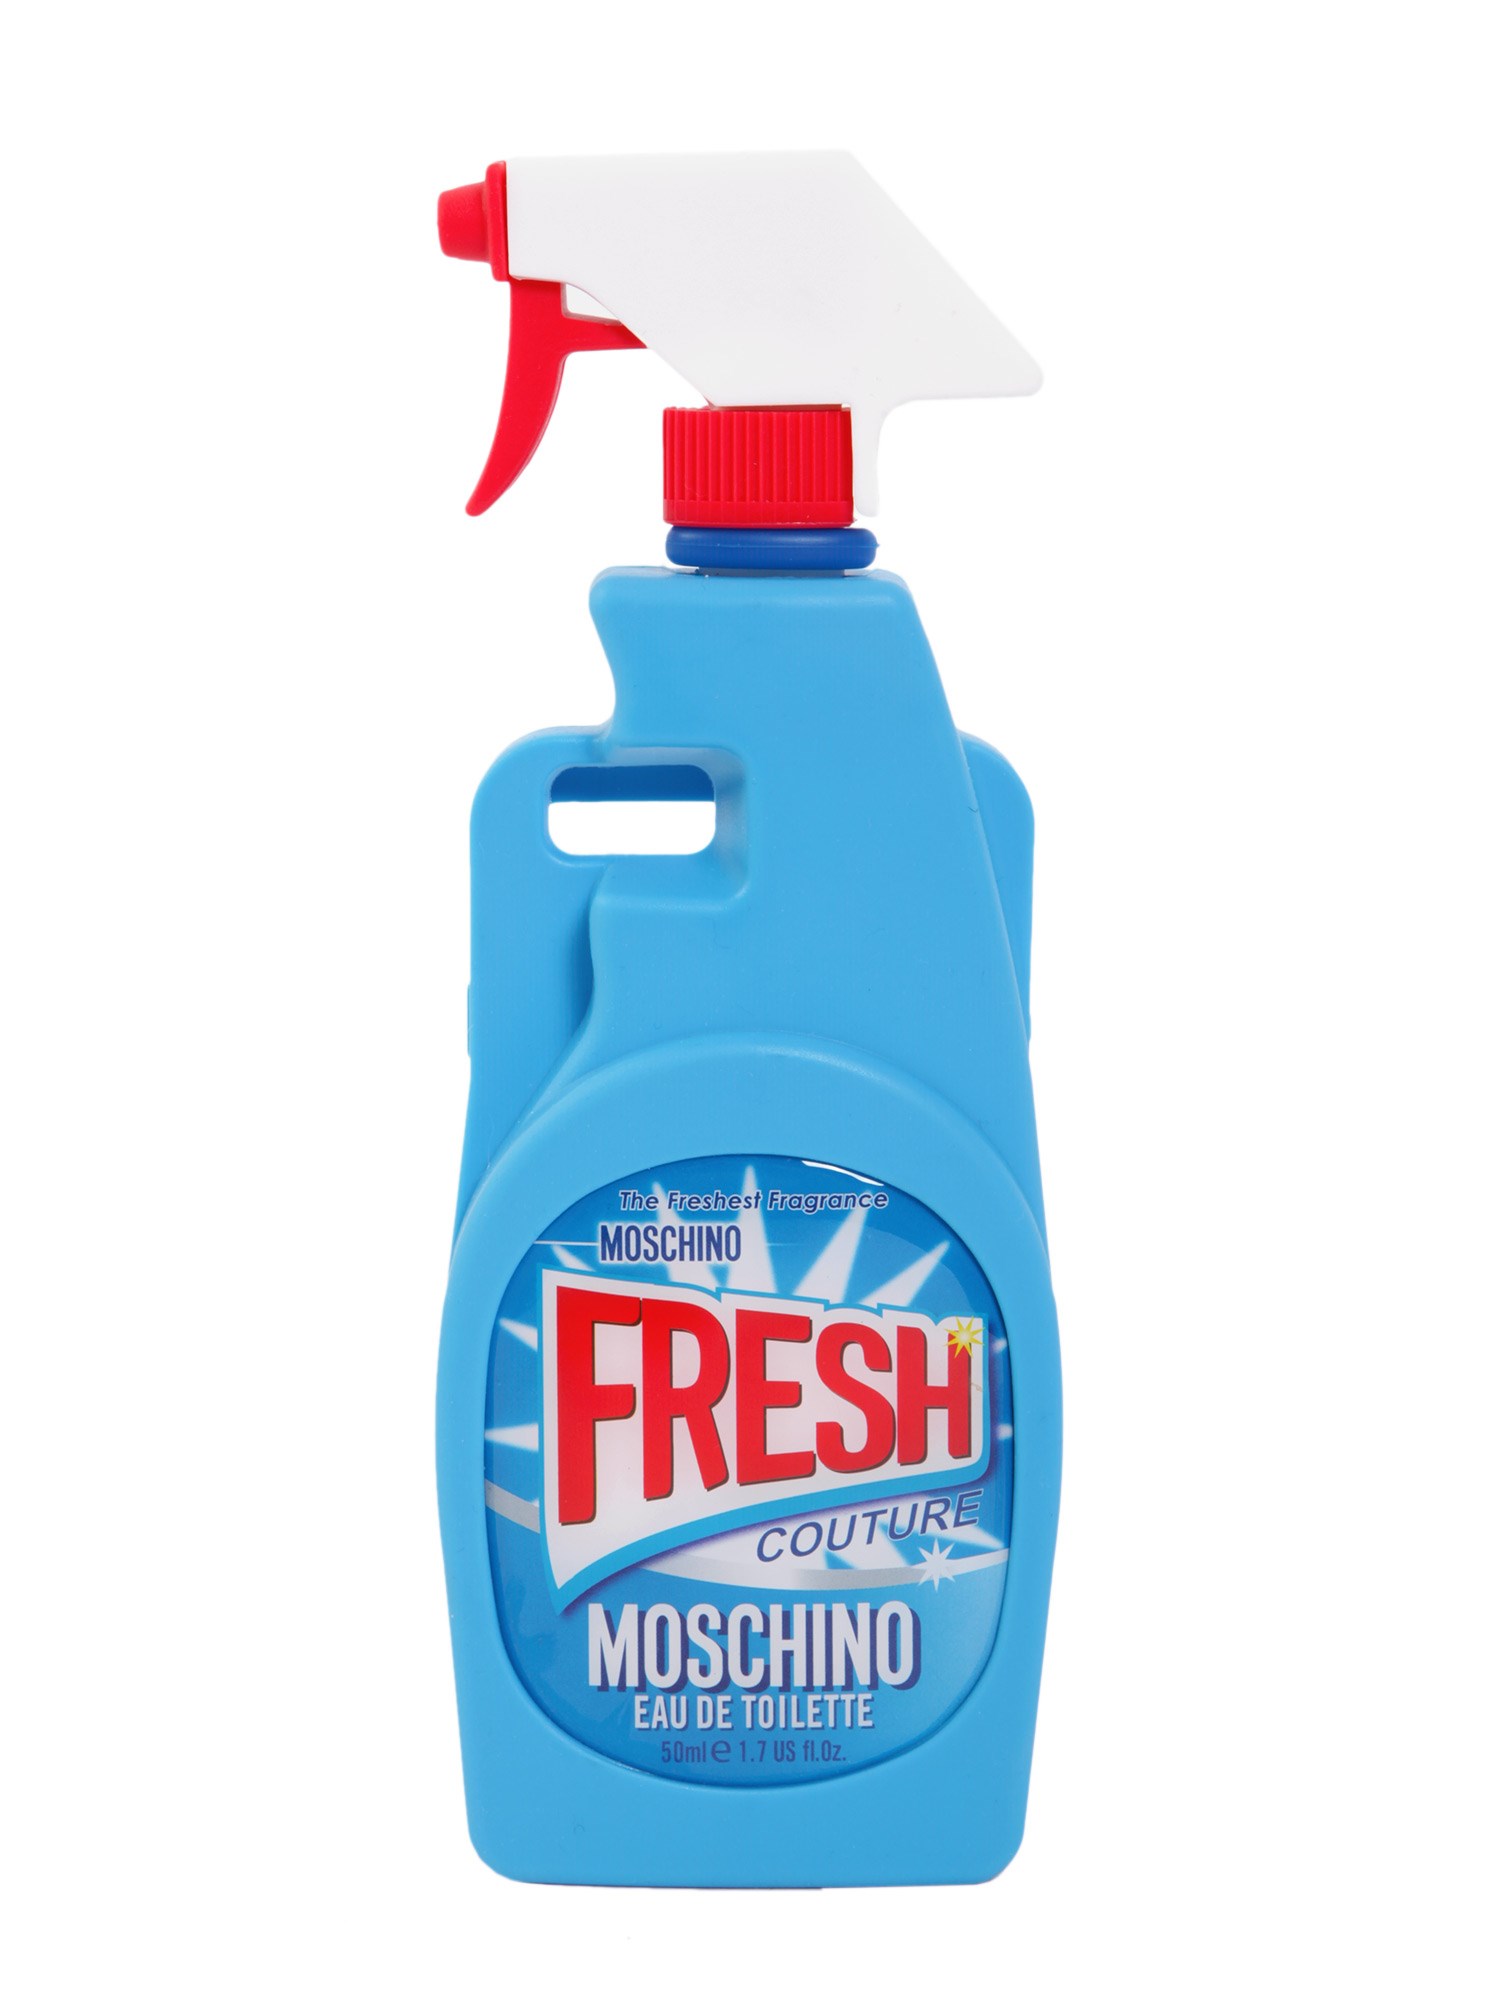 moschino capsule collection ss 16 i phone 6 cover